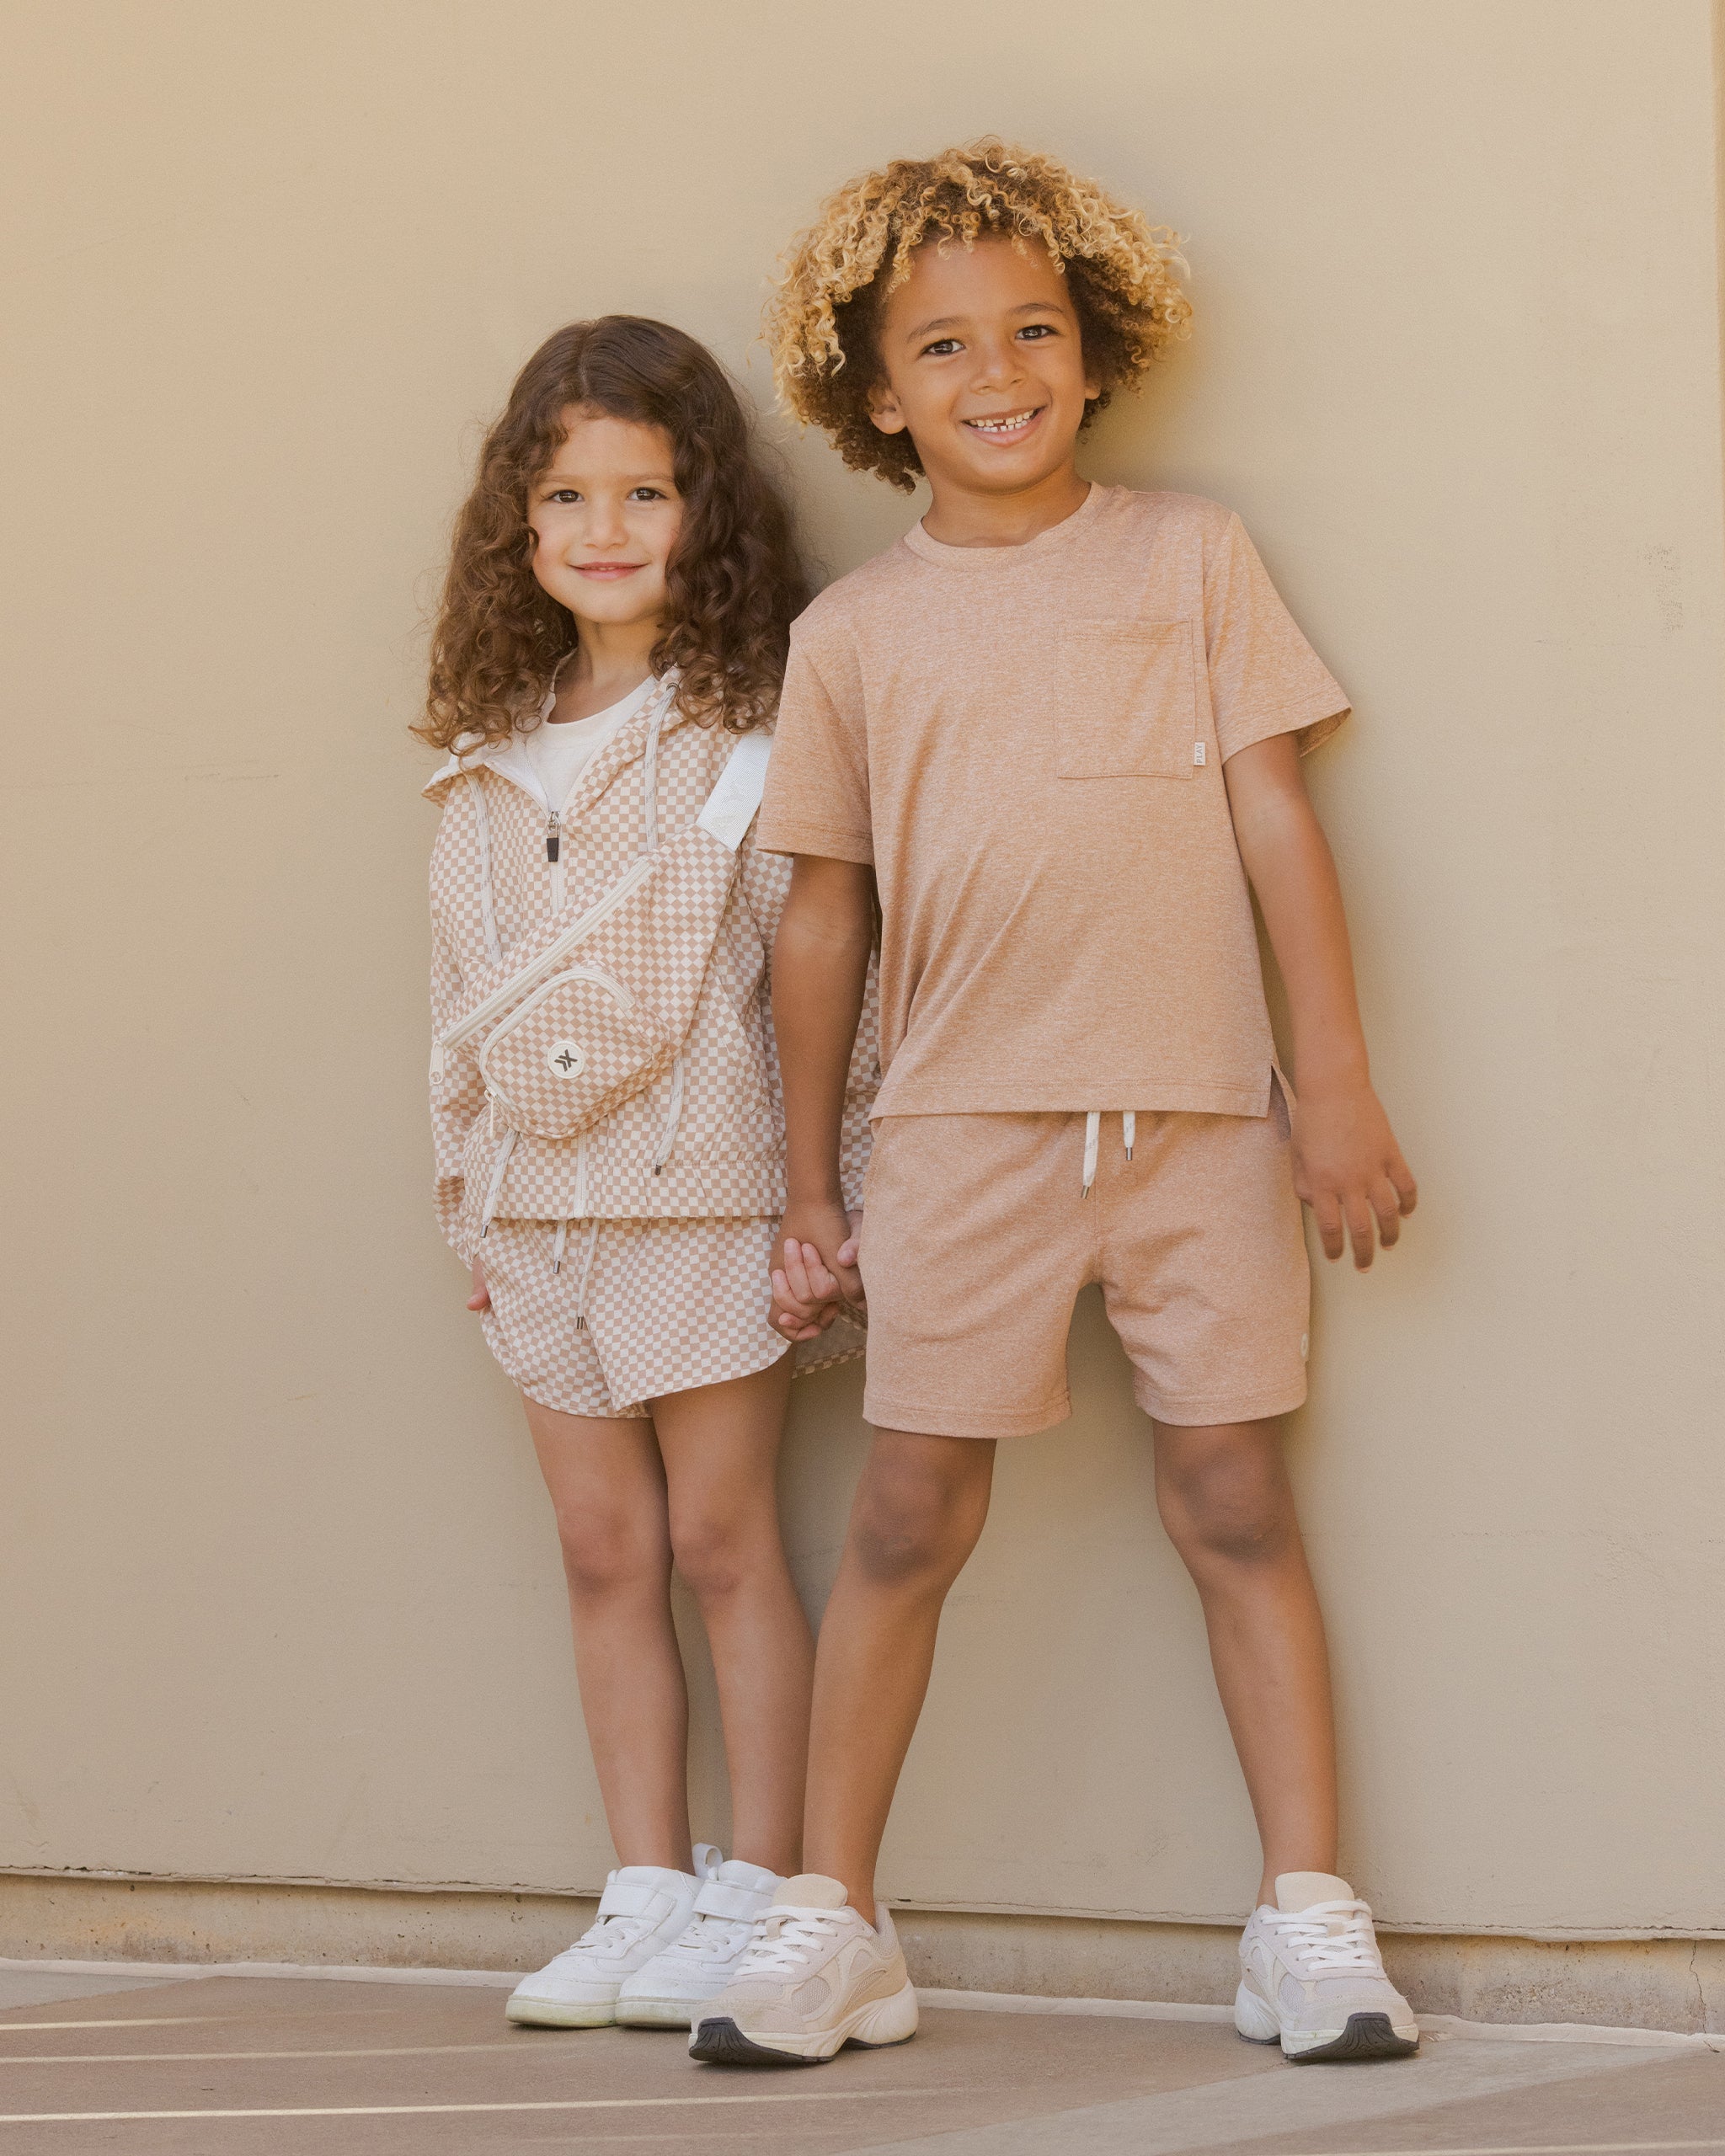 Oceanside Tech Short || Heathered Clay - Rylee + Cru | Kids Clothes | Trendy Baby Clothes | Modern Infant Outfits |